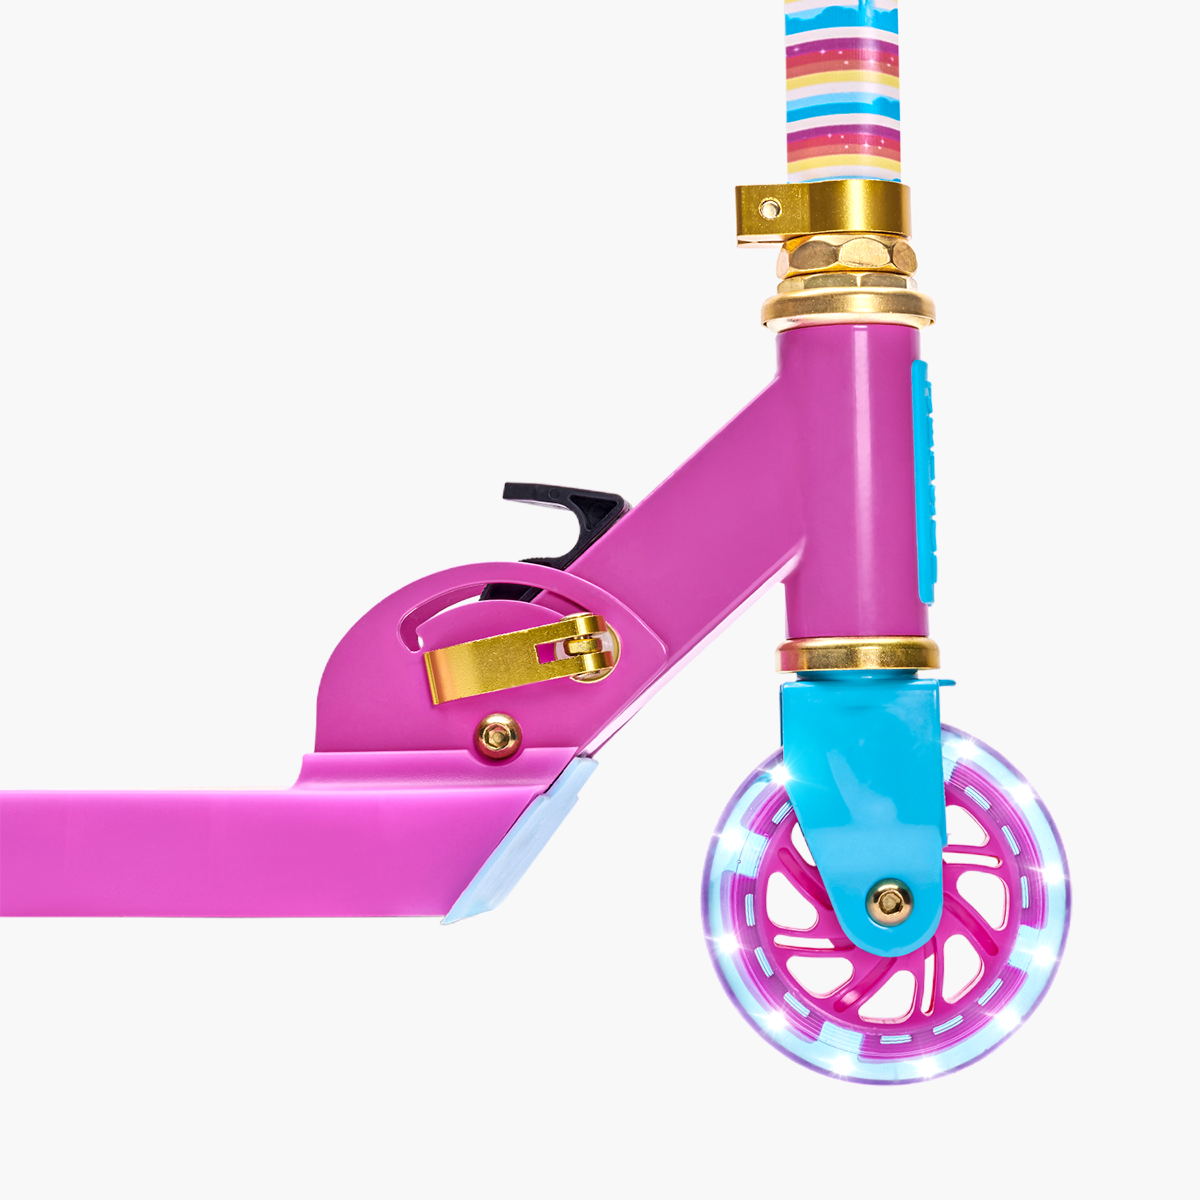 close up of the front wheel of the Princess kick scooter